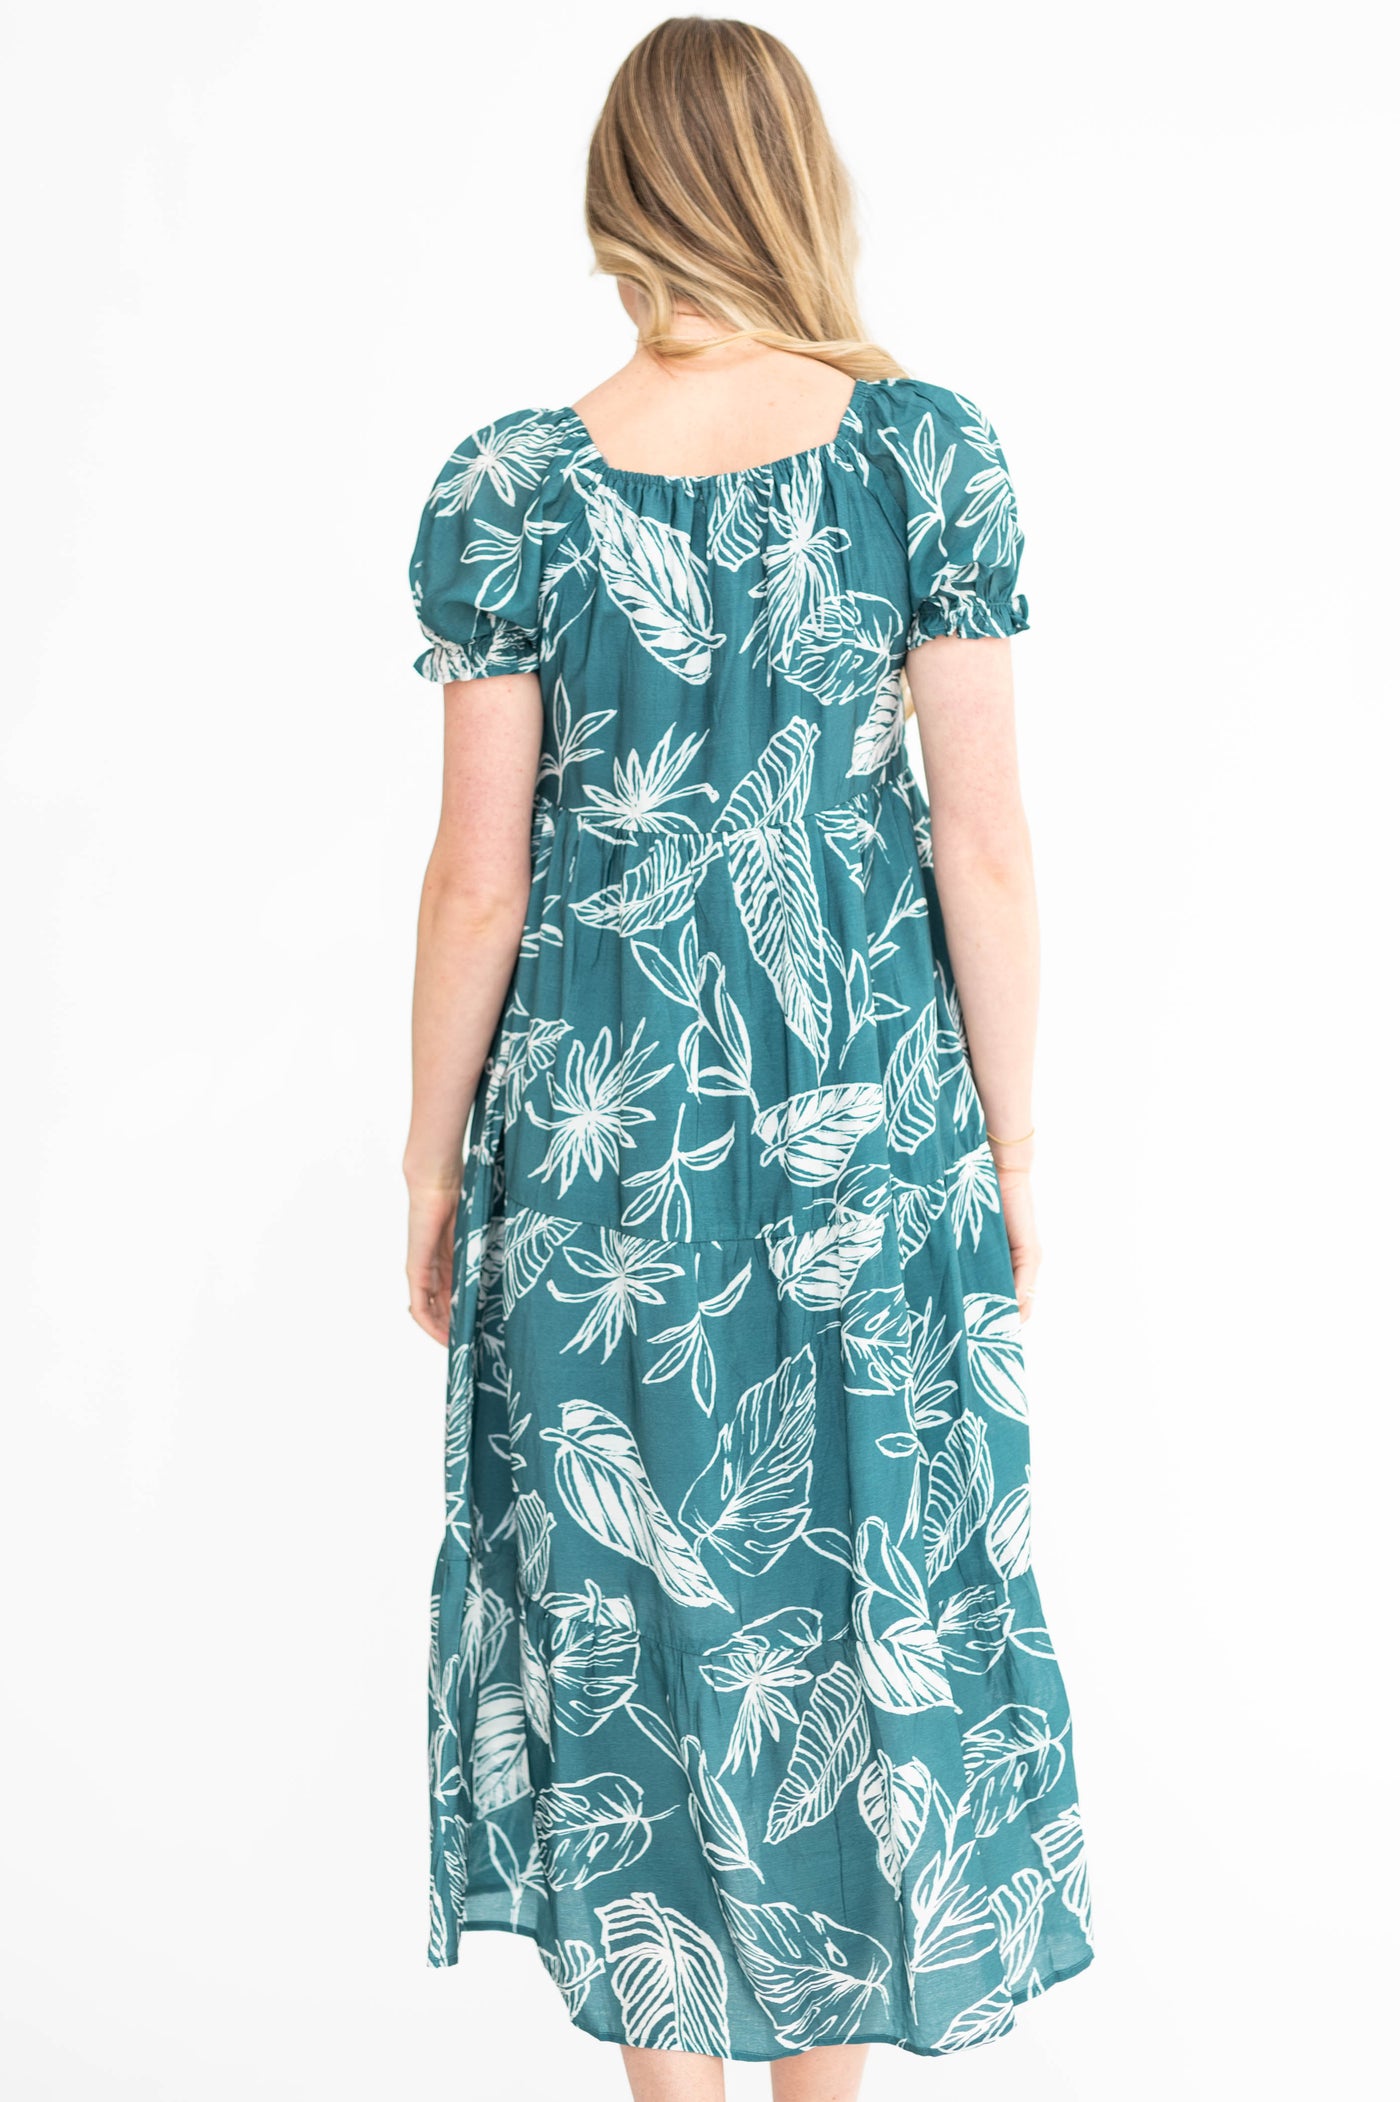 Back view of a short sleeve teal floral dress